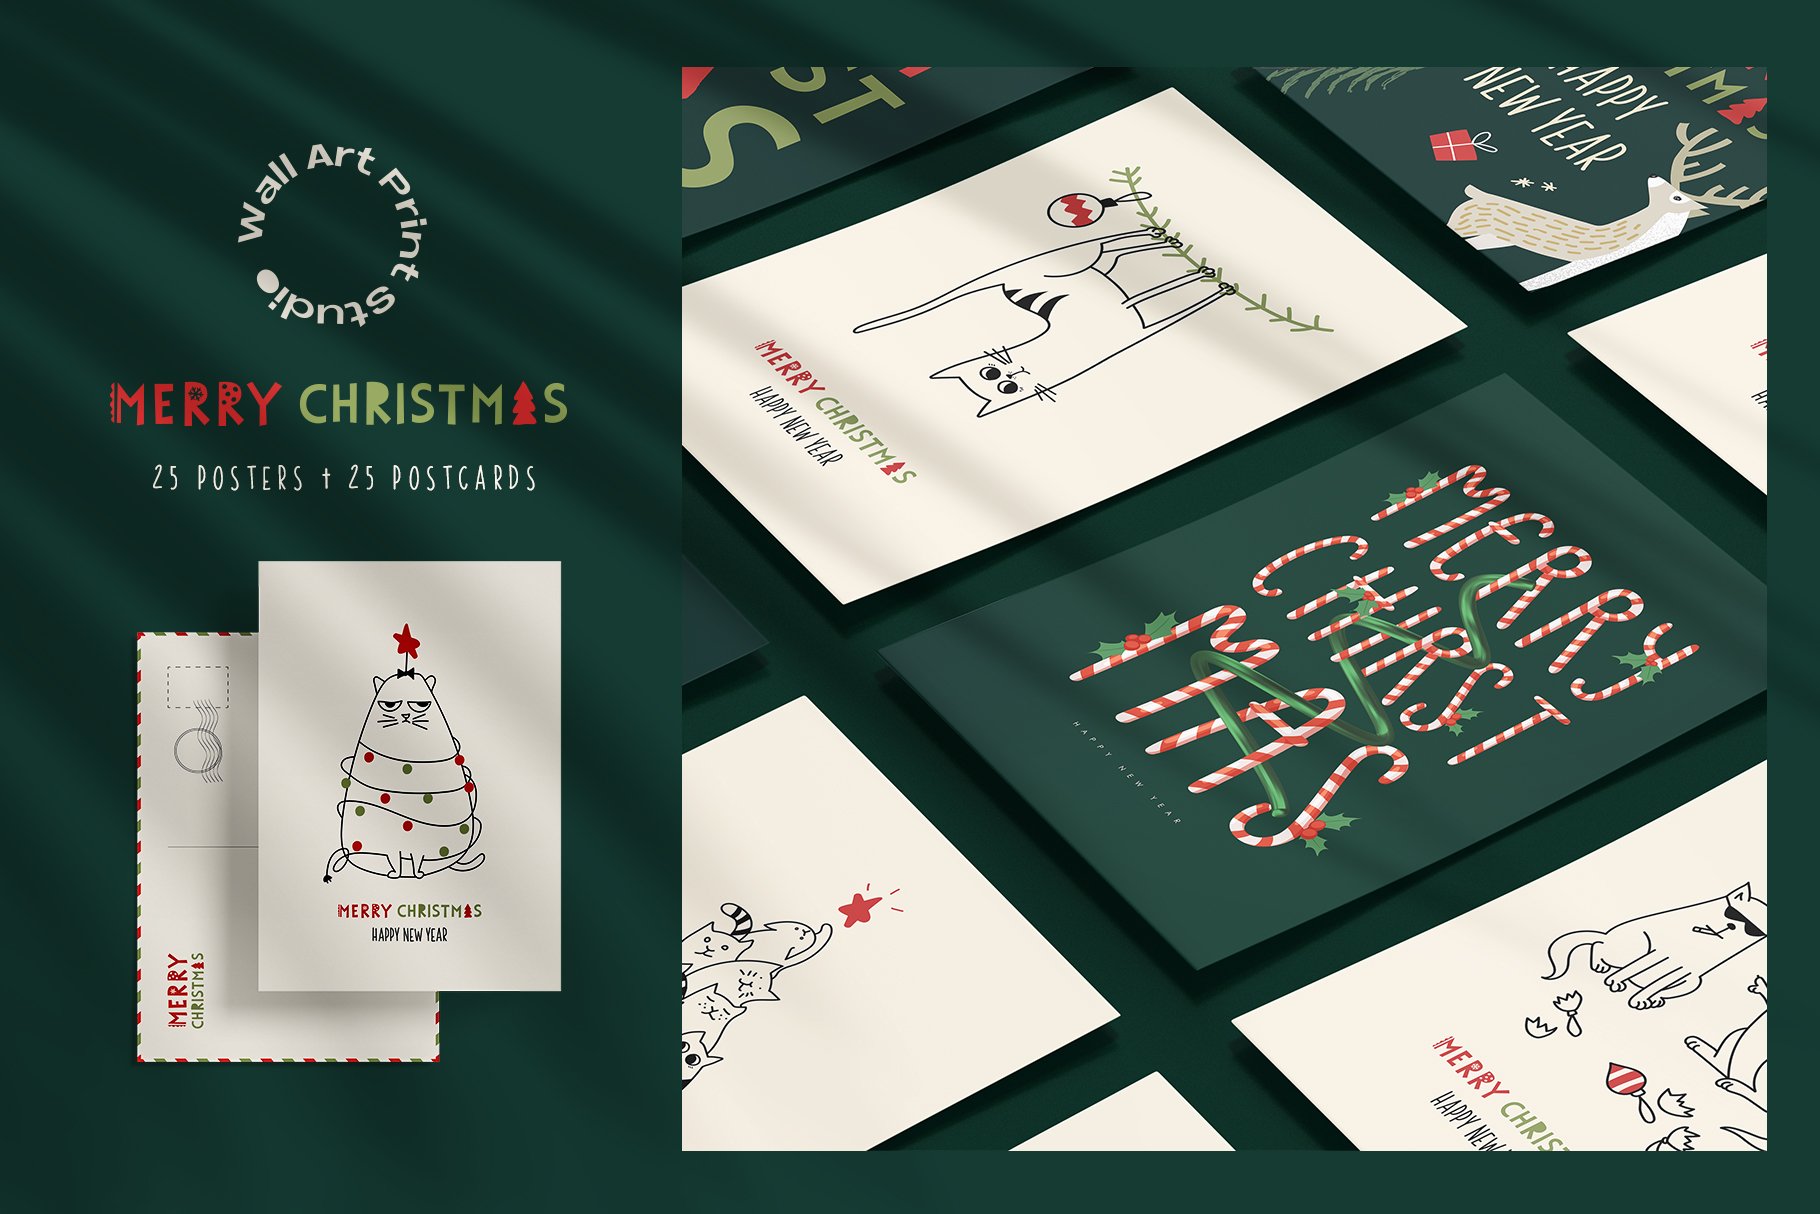 Merry Christmas Posters & Postcards cover image.